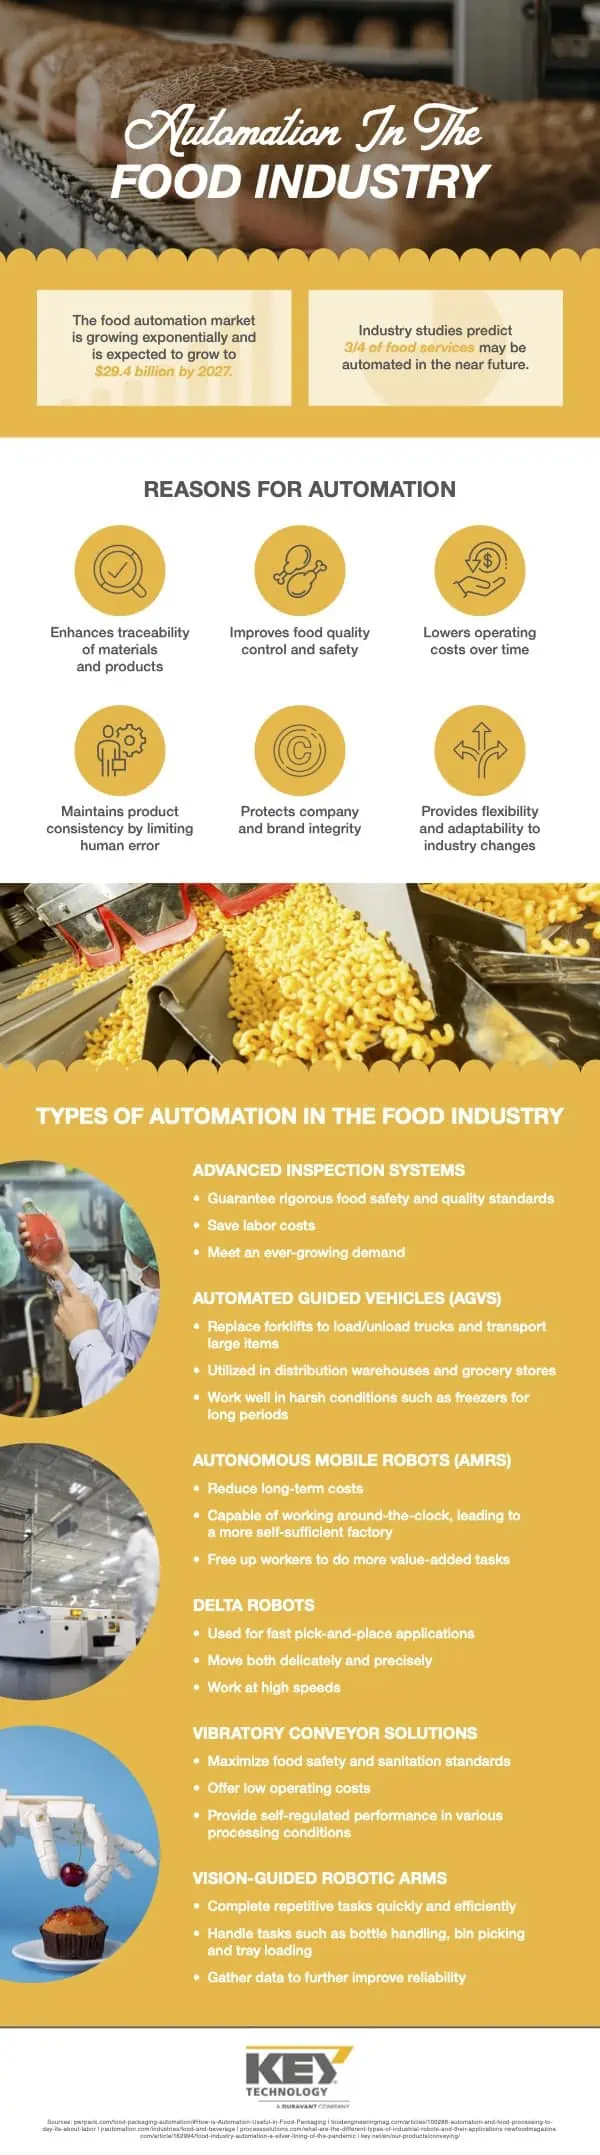 Automation in the Food Industry